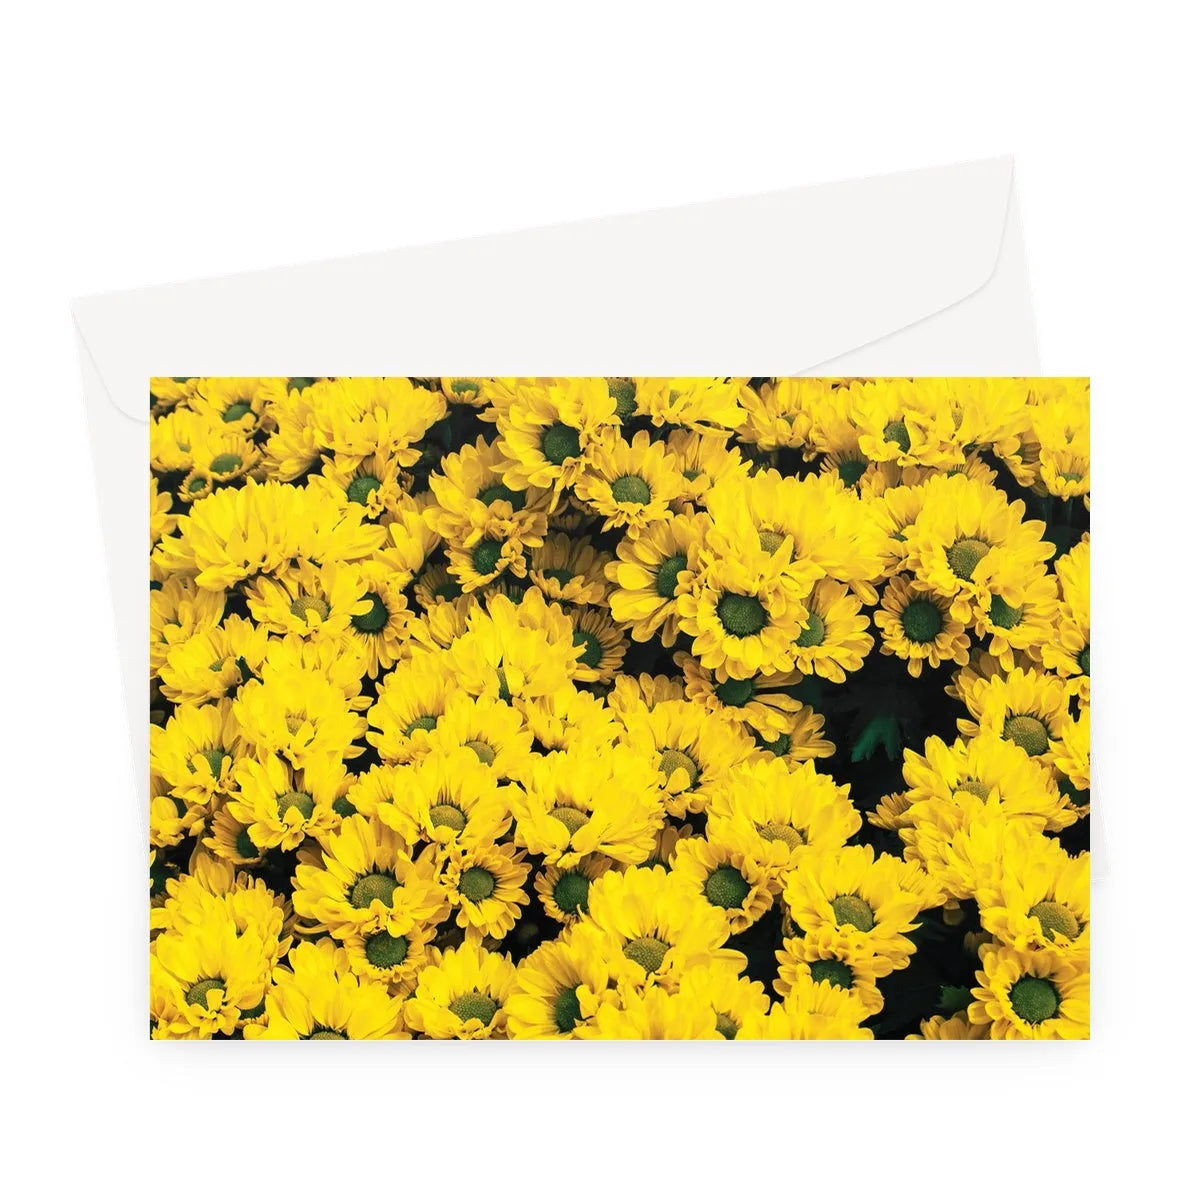 Yellow Brick Road Greeting Card - A5 Landscape / 1 Card - Greeting & Note Cards - Aesthetic Art